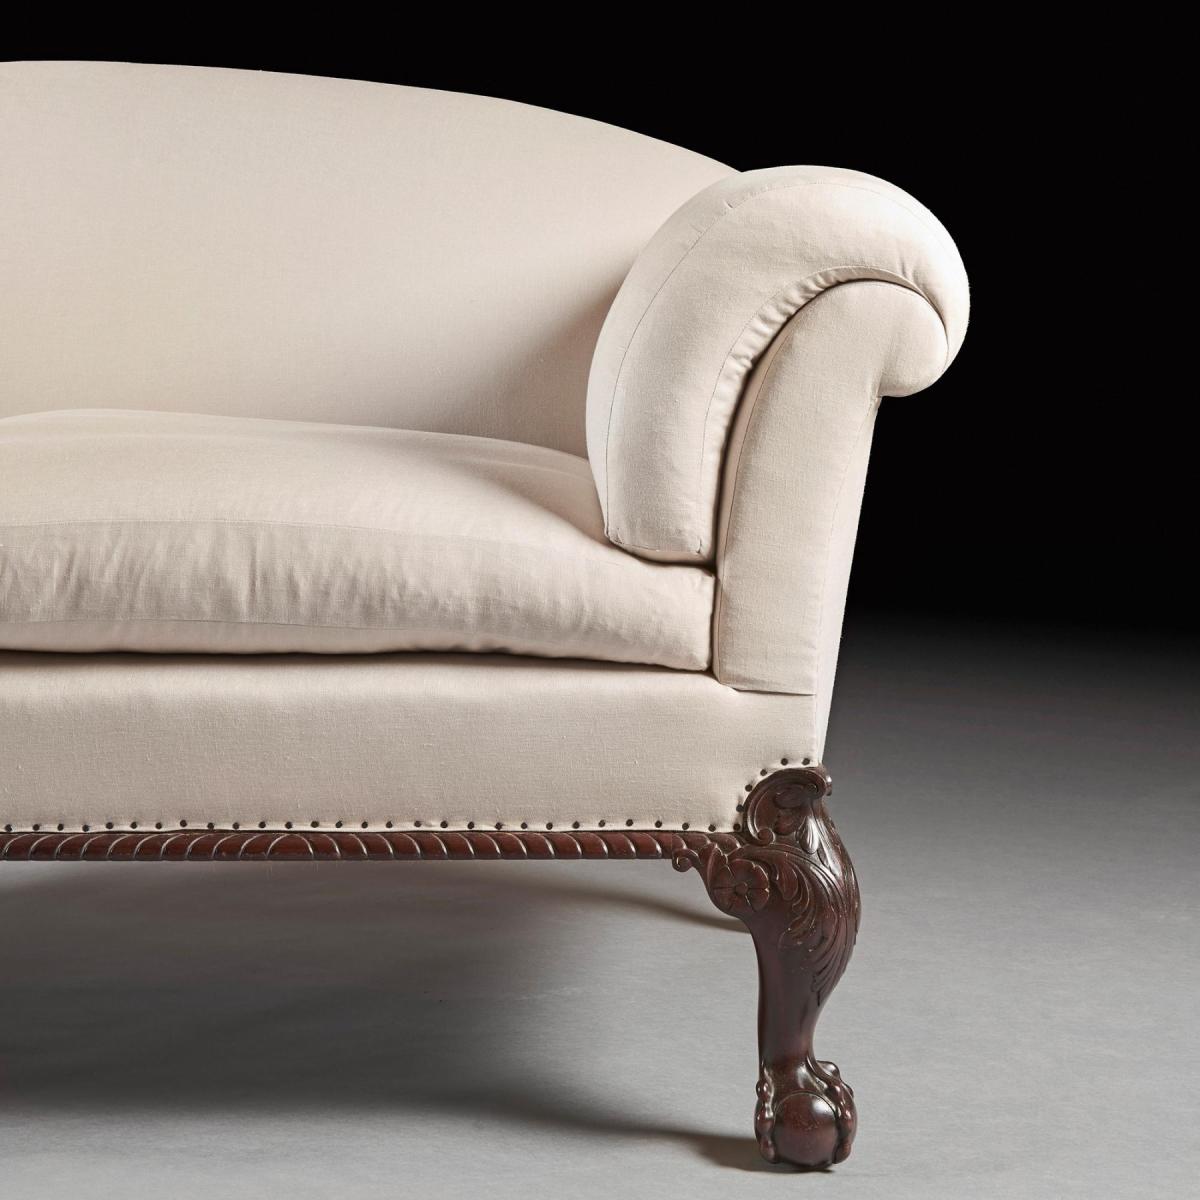 19th Century Ball and Claw Sofa After Howard and Sons